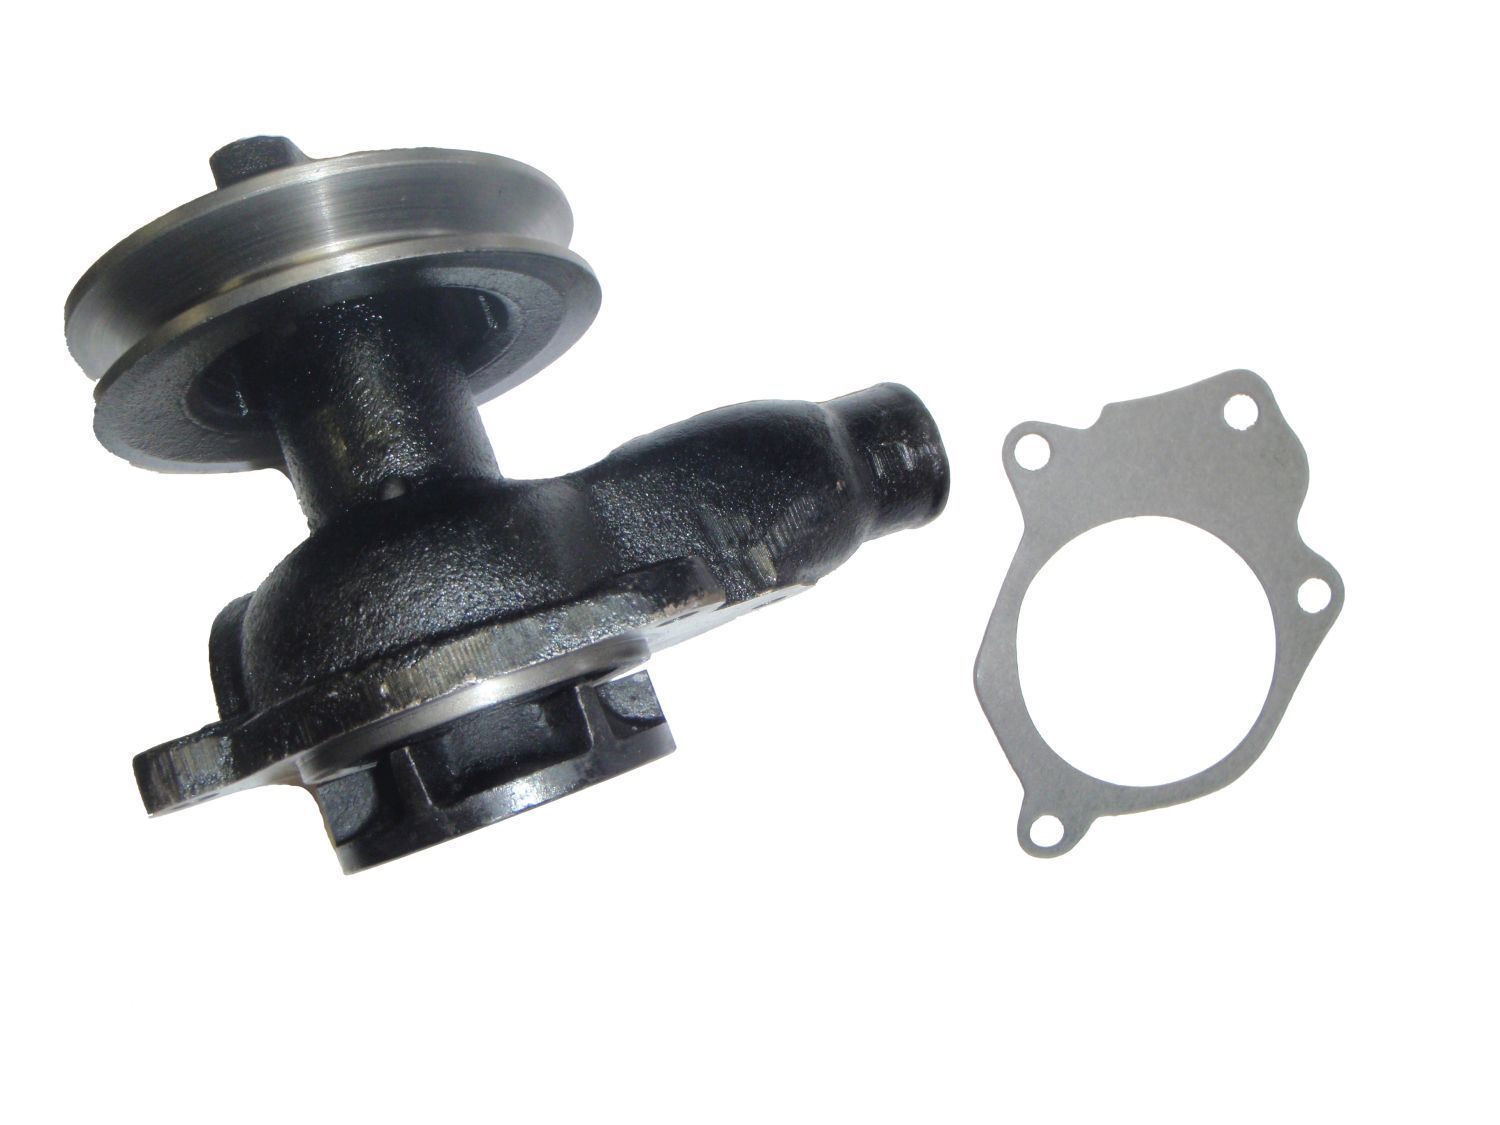 WATER PUMP 1941-1971 Willys Jeep 134 ci 4-cyl F & L head Single Groove Pulley